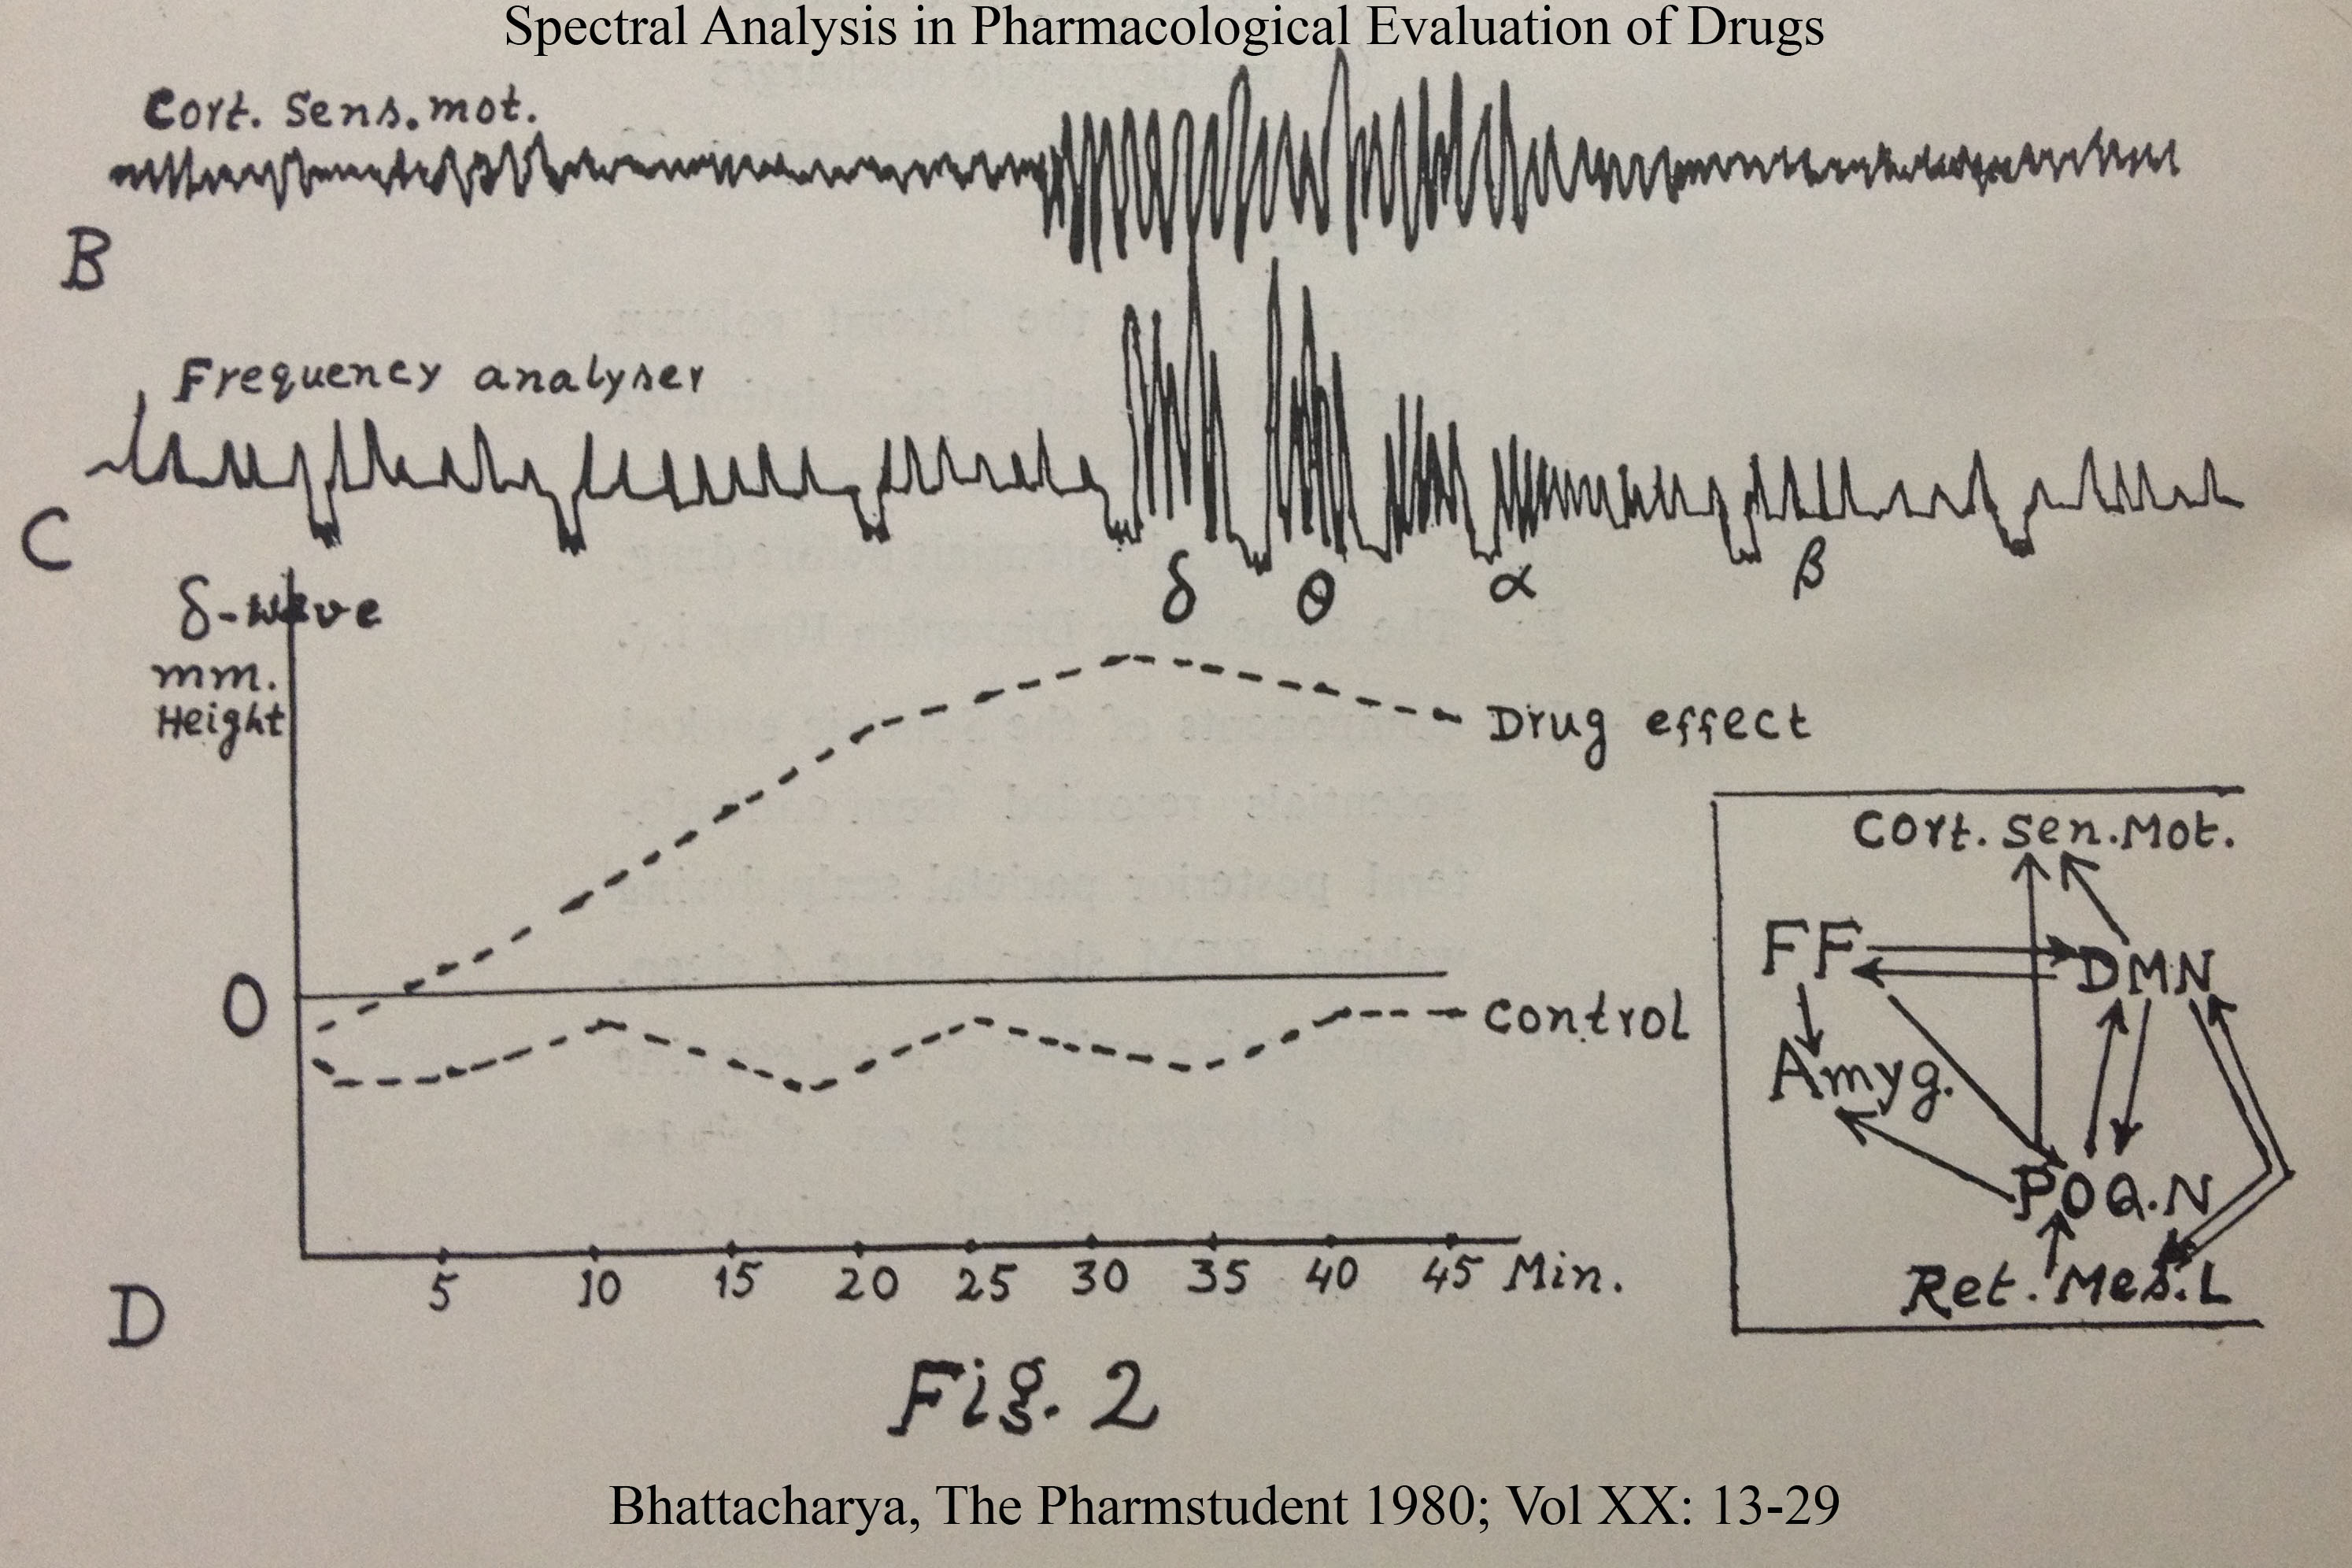 Spectral Analysis in Pharmacology